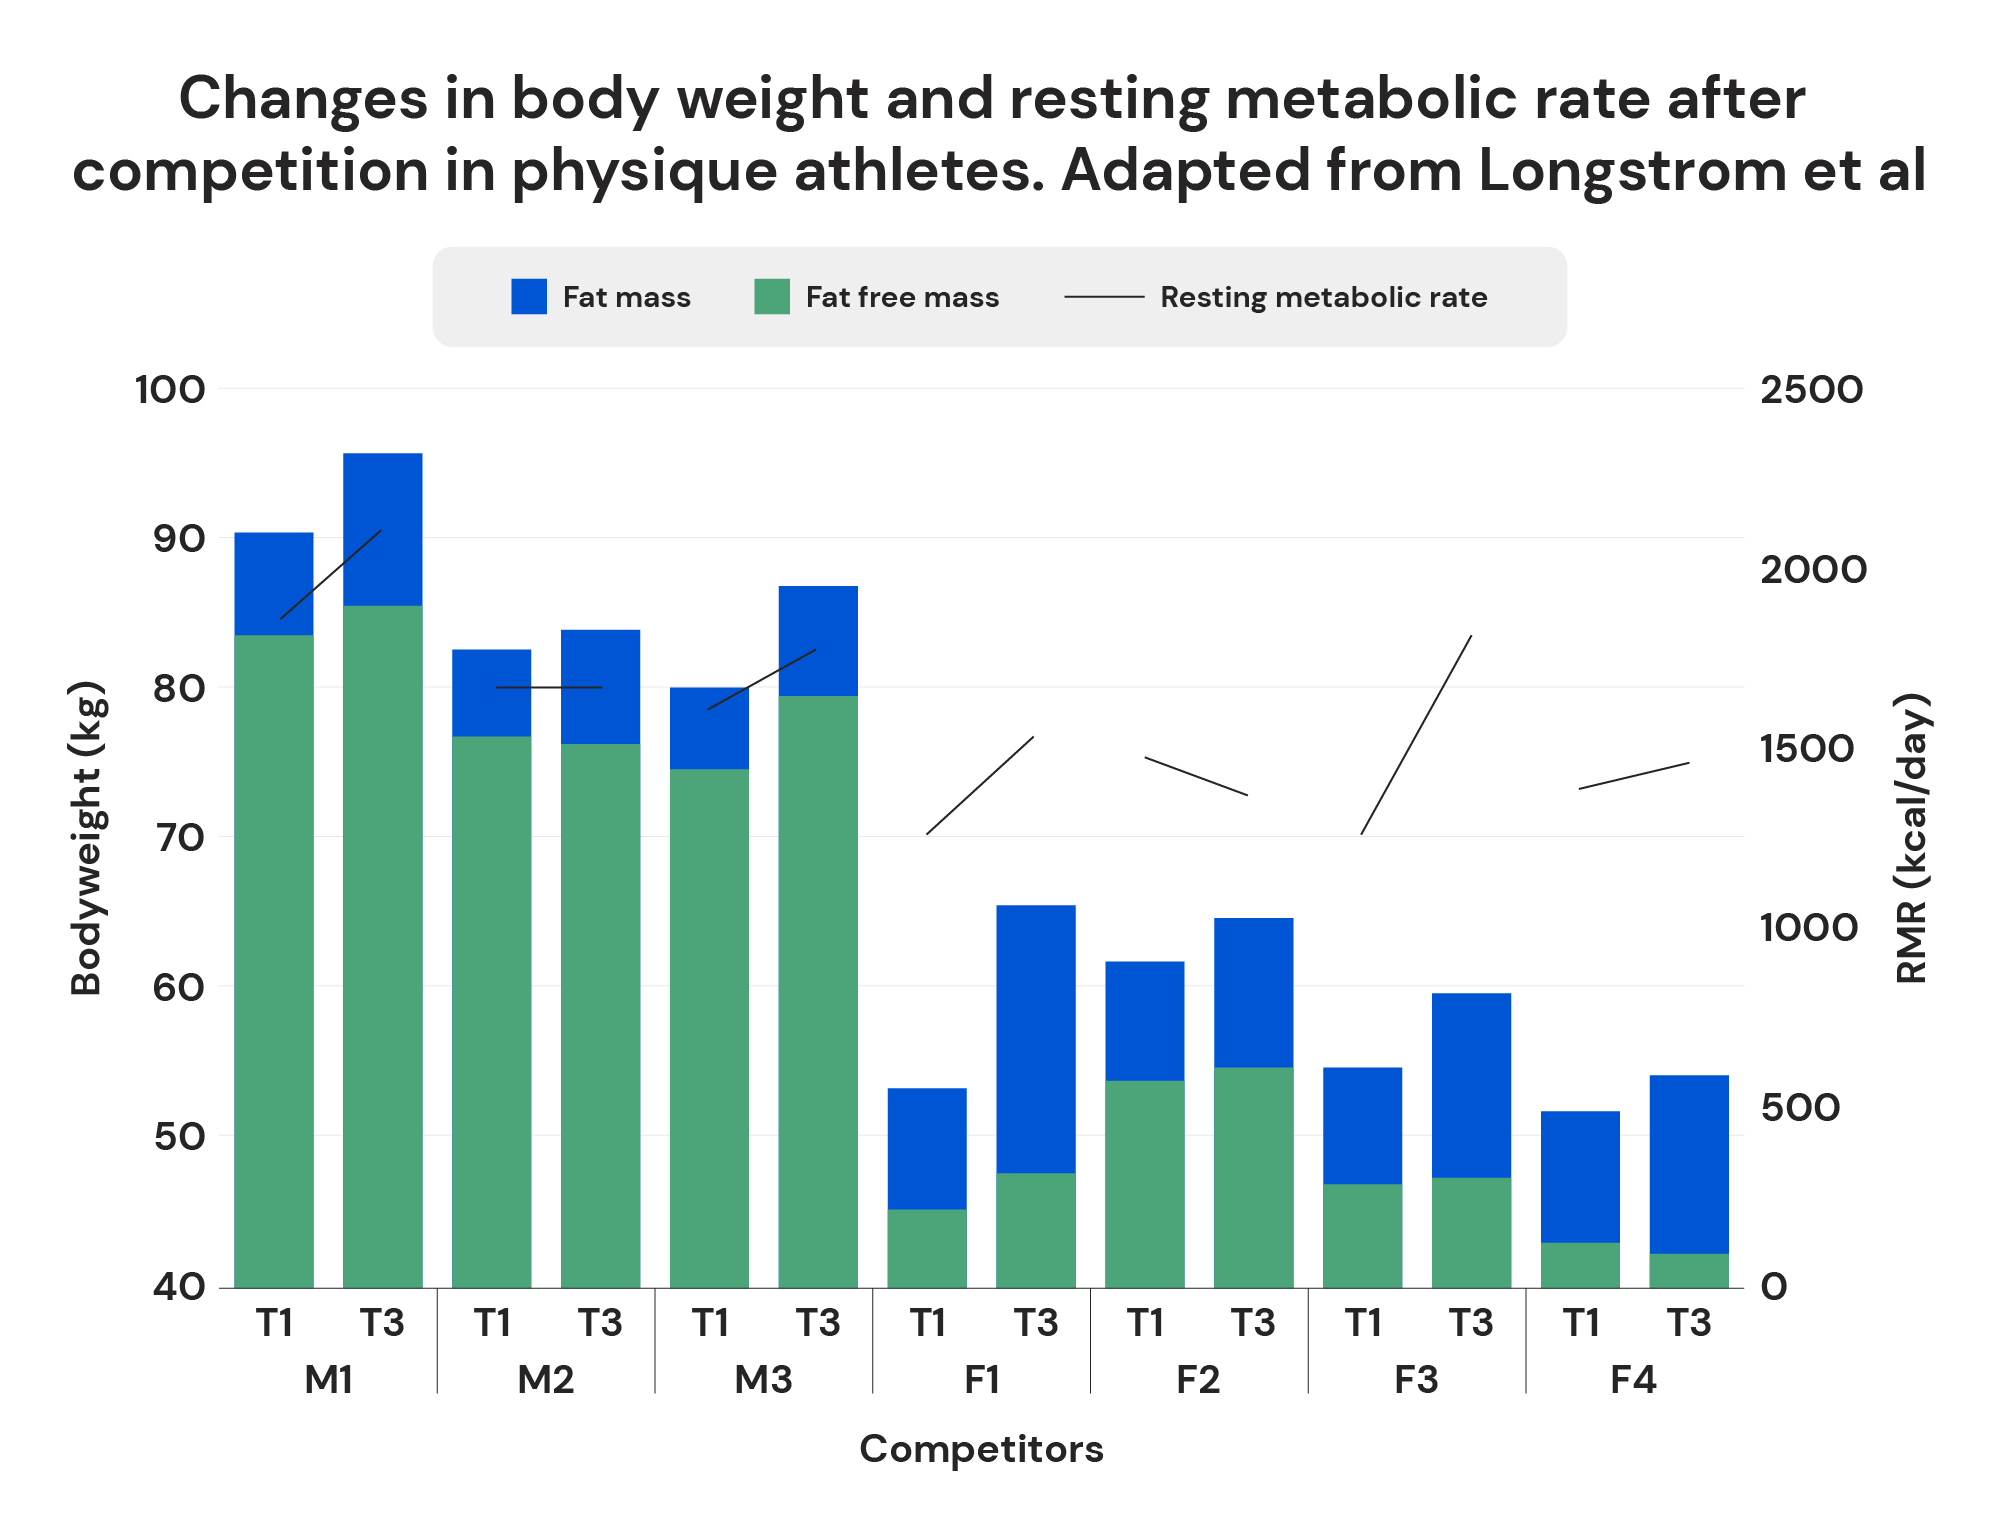 Changes in body weight and resting metabolic rate after competition in physique athletes